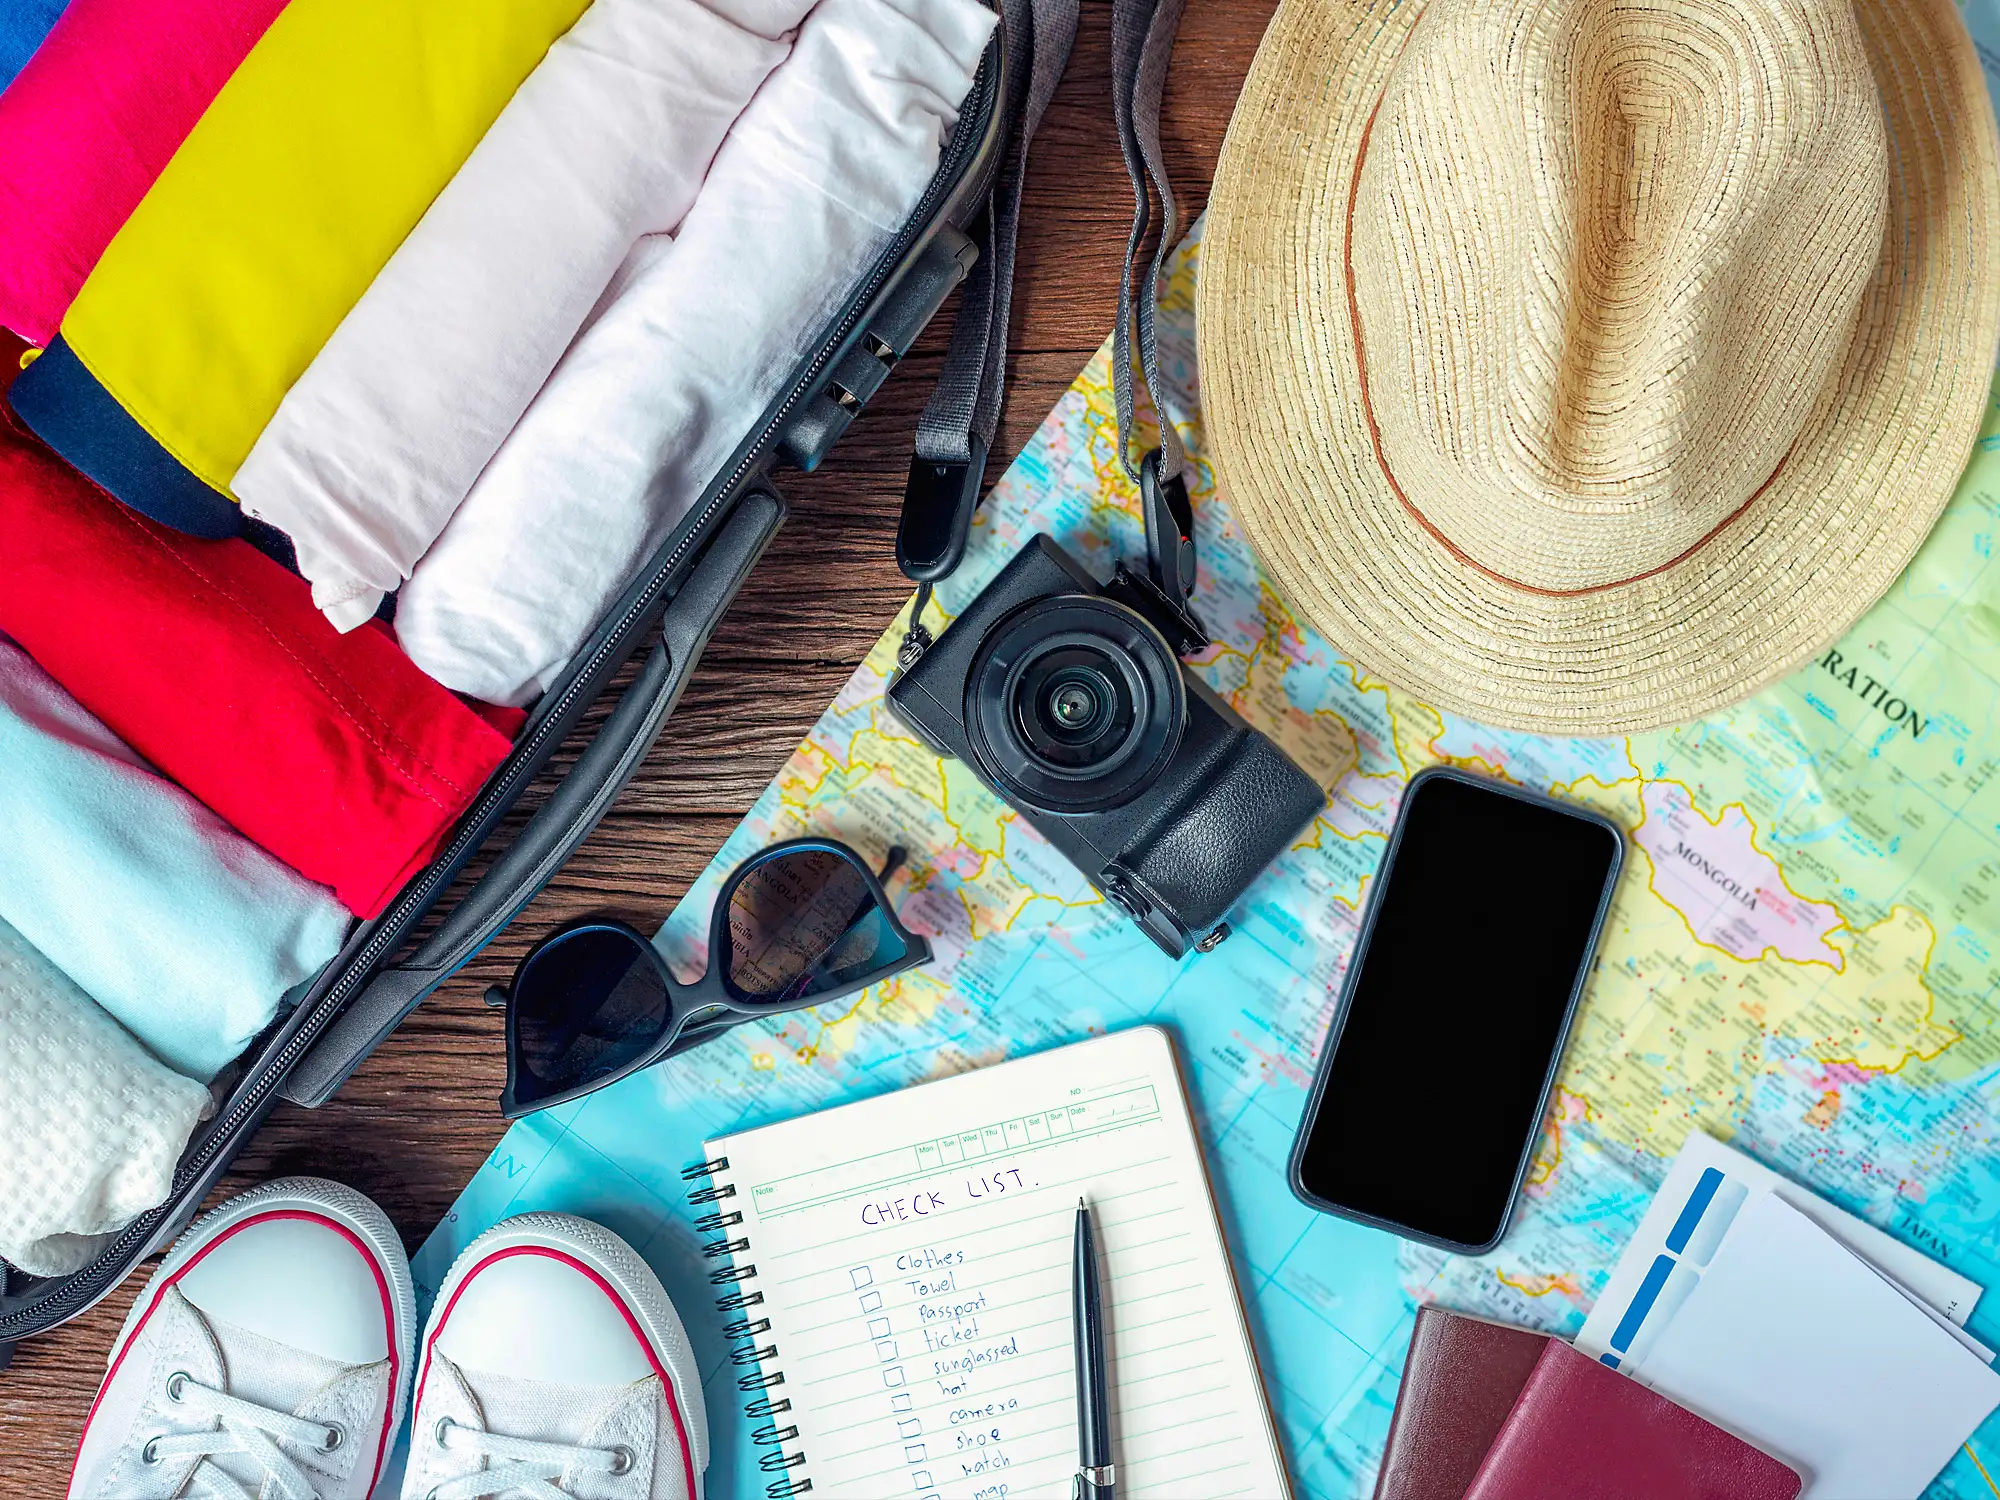 Long Flight Travel Essentials - Travel Packing Guide